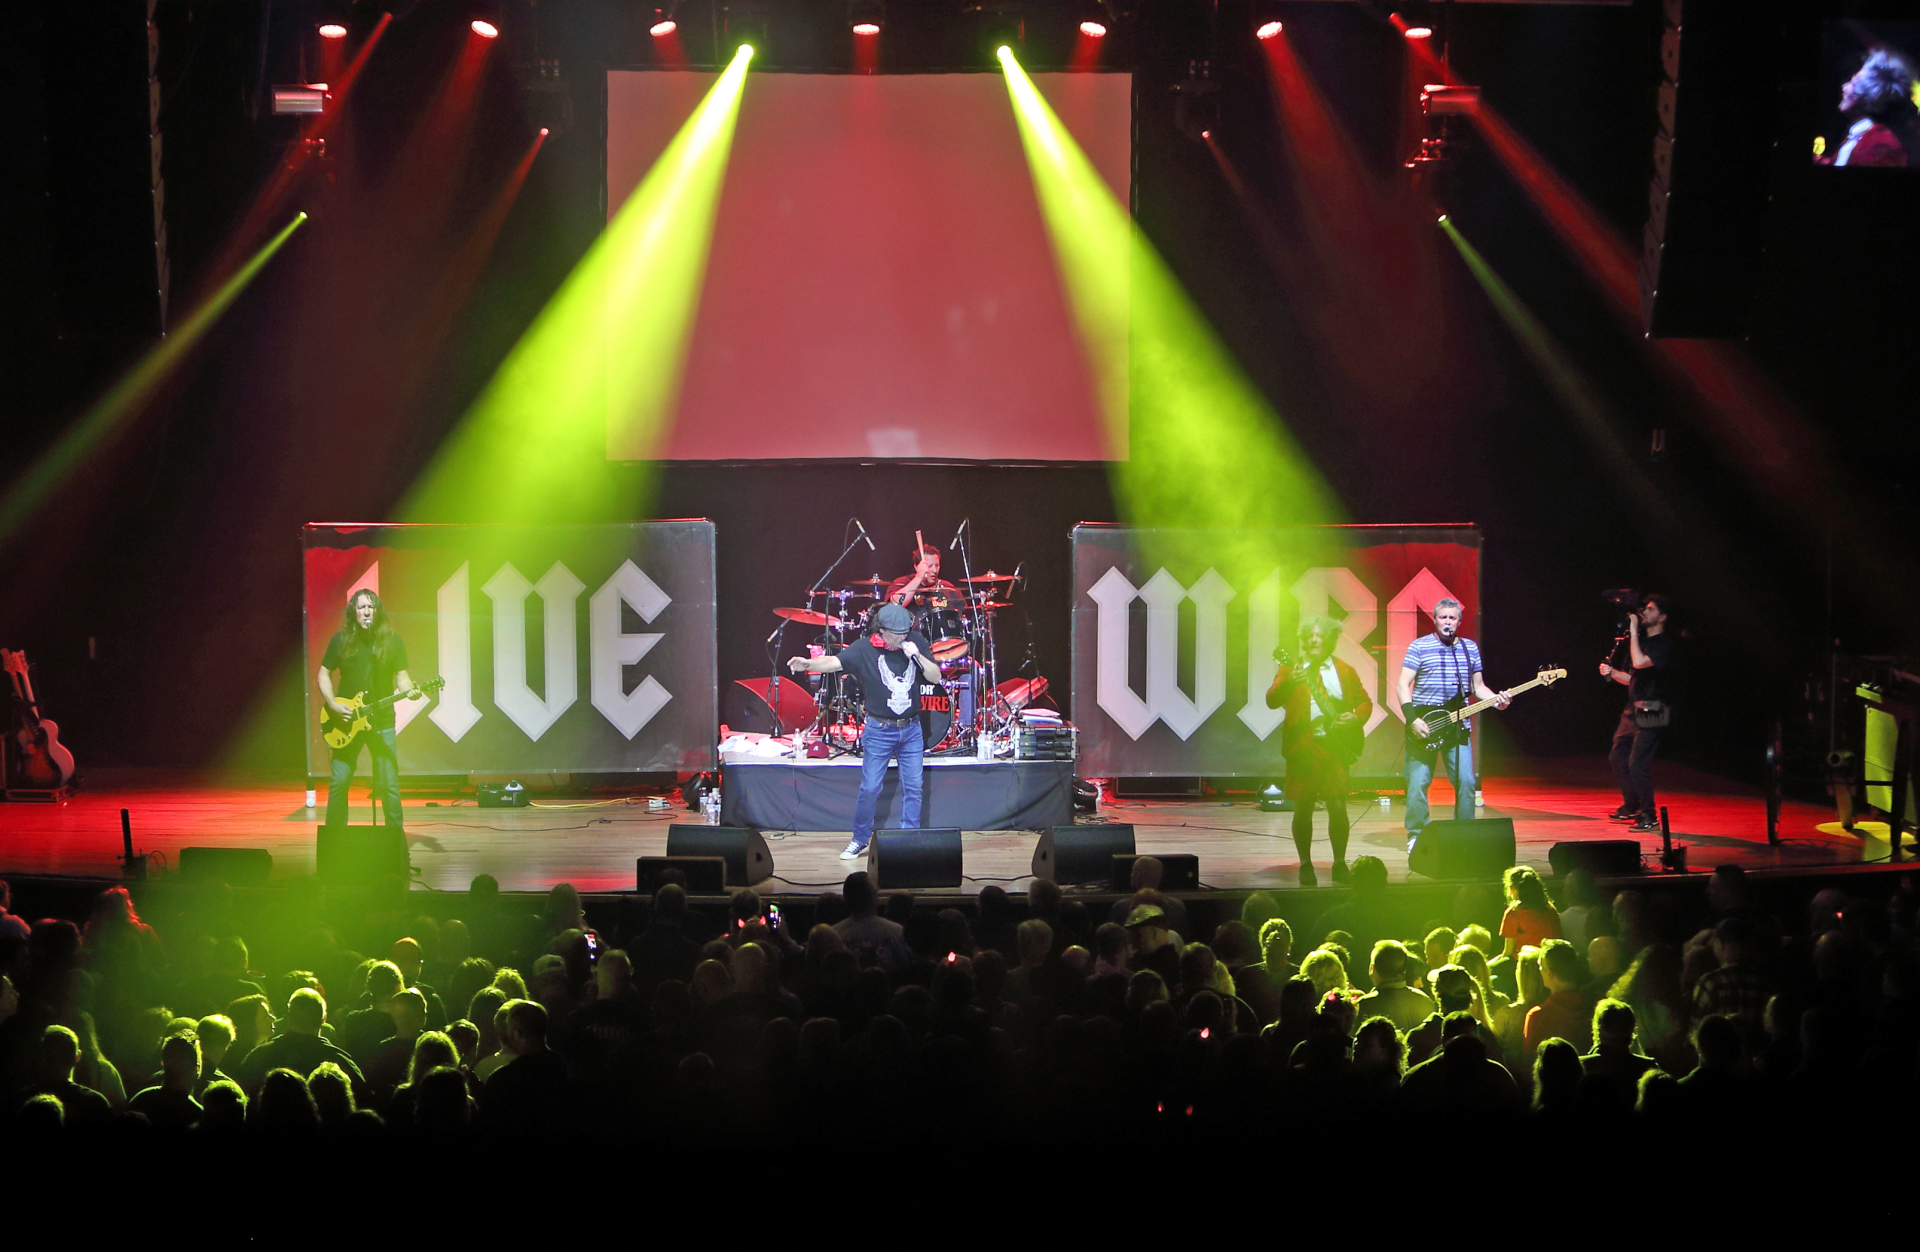 Live Wire – AC/DC Tribute Gig Review